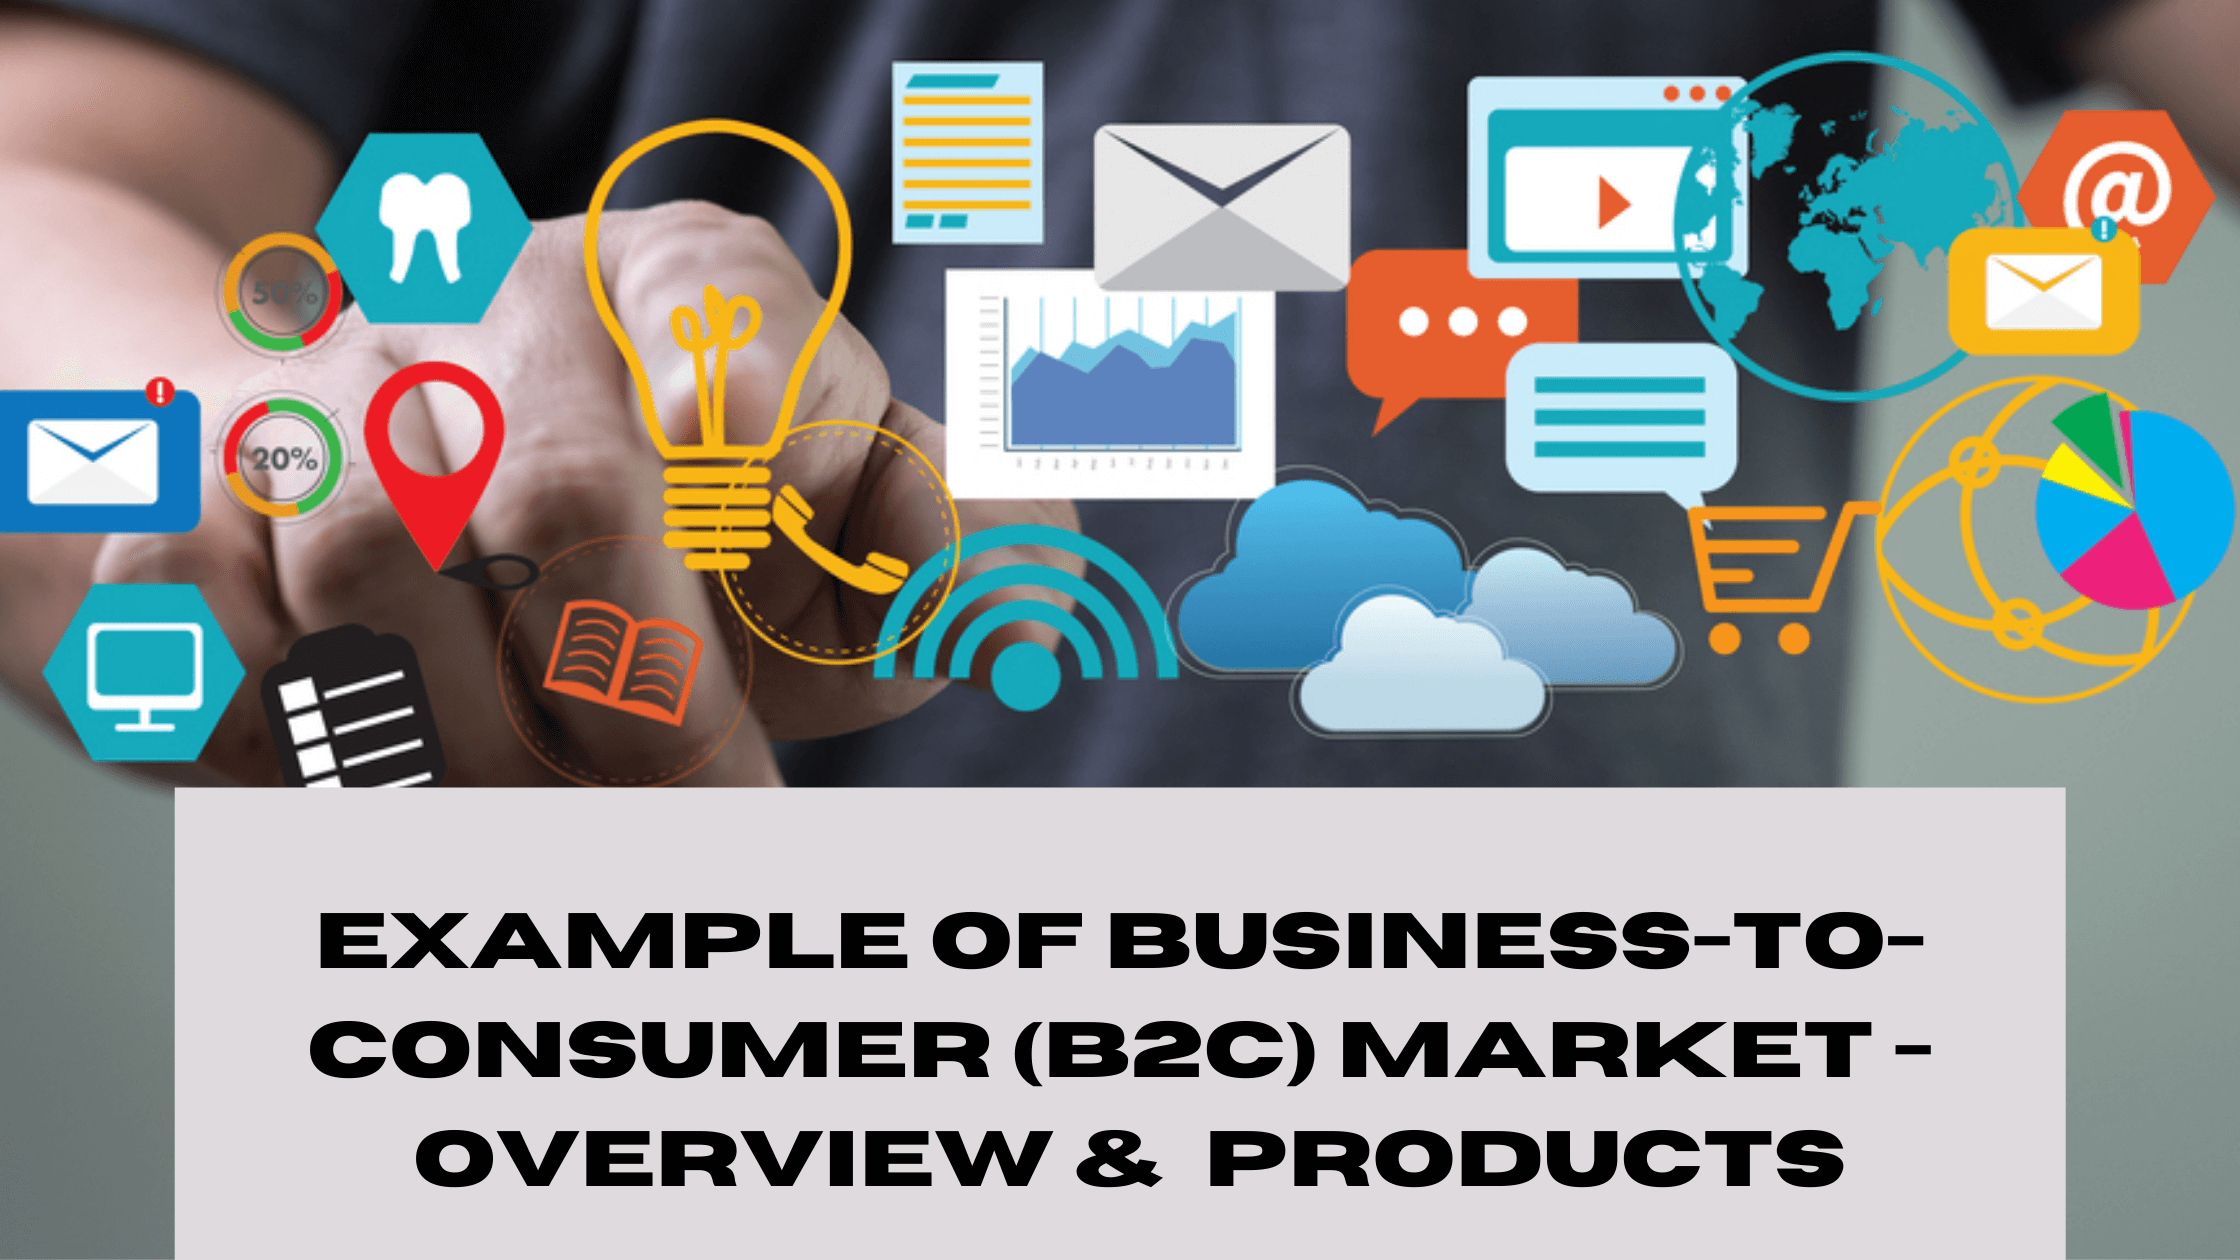 Example Of Business-To-Consumer (B2C) Market - Overview & Products